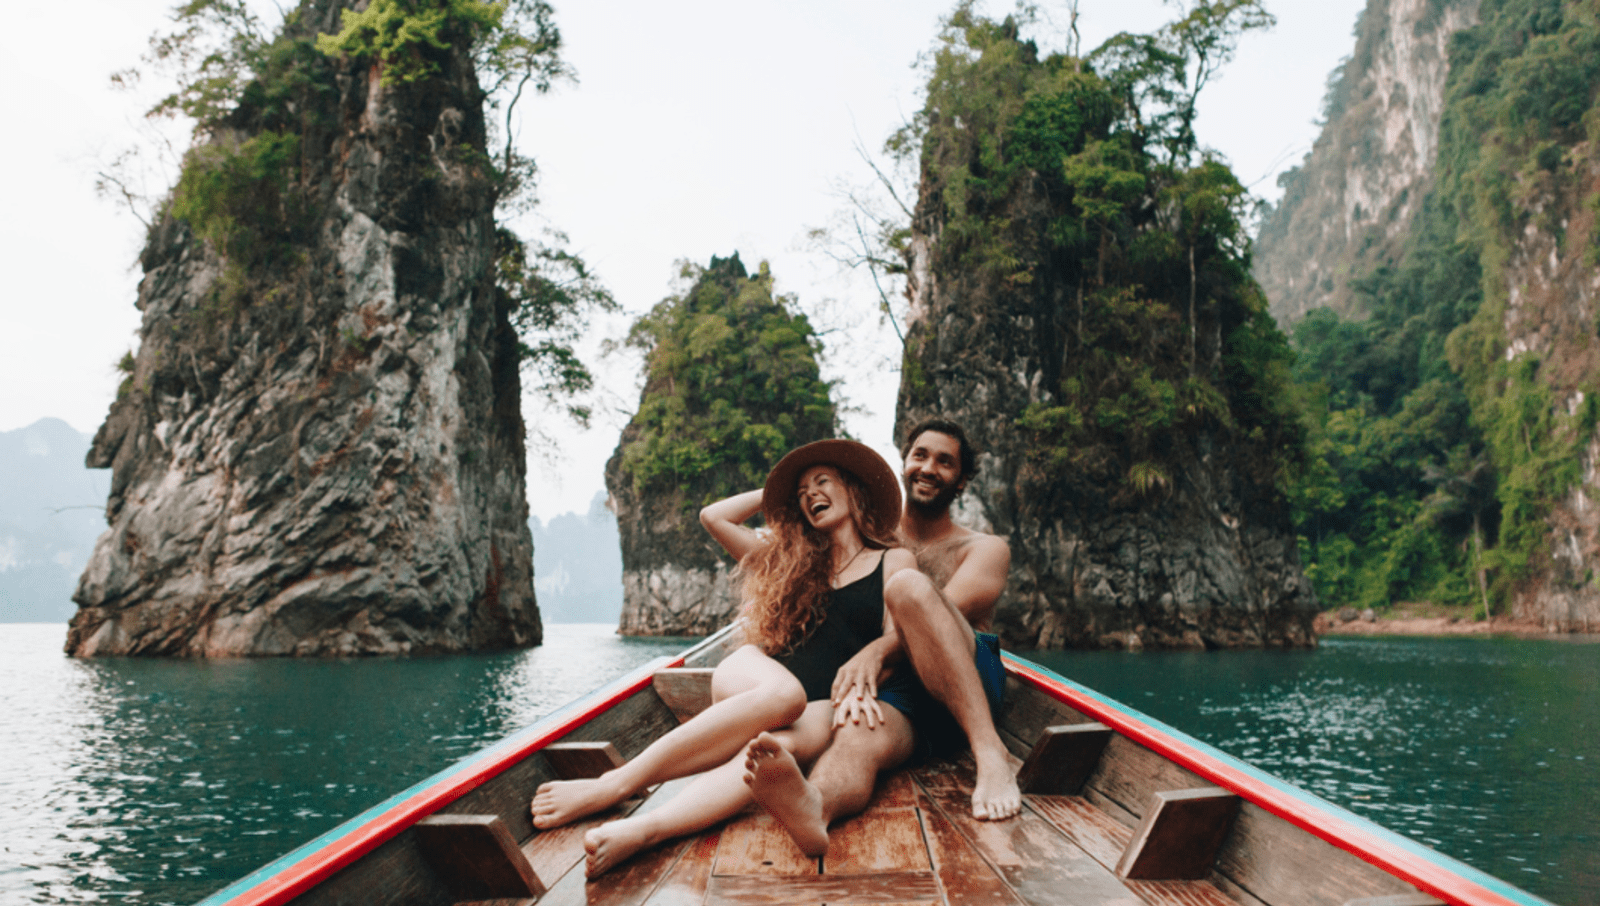 Couple sitting at top of boat with large rock formations in background on blue water